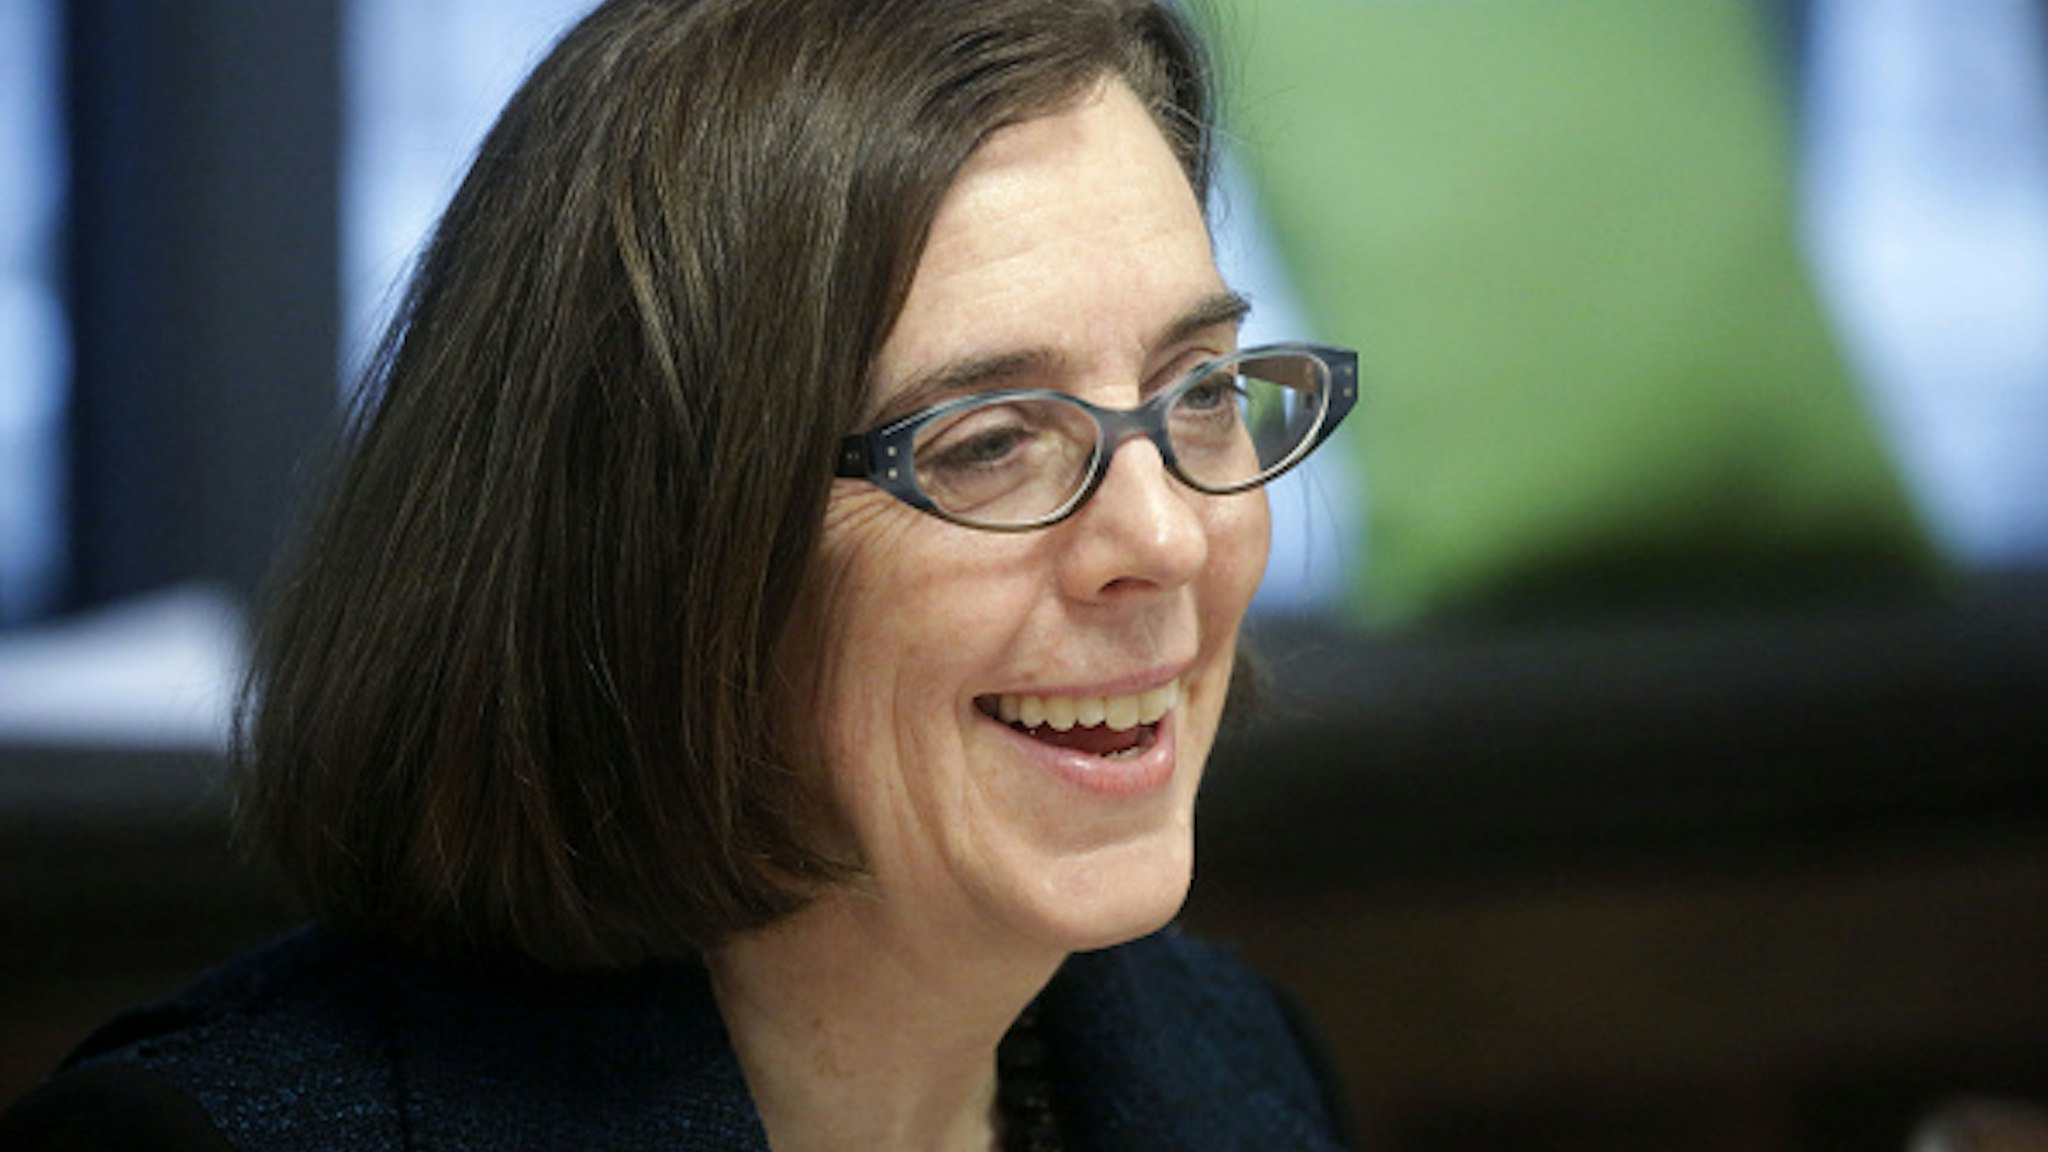 Kate Brown, governor of Oregon, smiles during an interview in Portland, Oregon, U.S. on Wednesday, Jan. 20, 2016. Brown, a Democrat, joined the state House of Representatives in 1991, was later elected to the Senate and served as secretary of state since 2009, before taking over as governor in February.